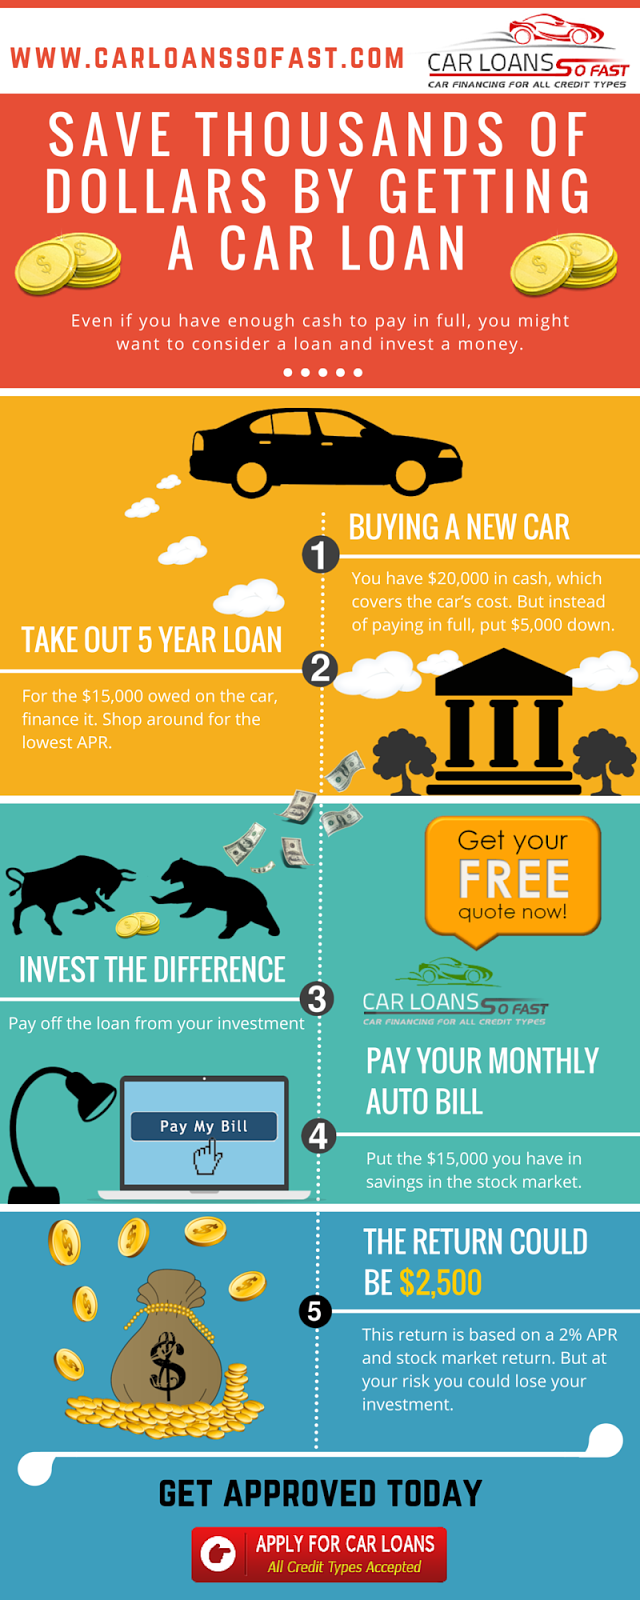 Save Thousands of Dollars By Getting a Car Loan